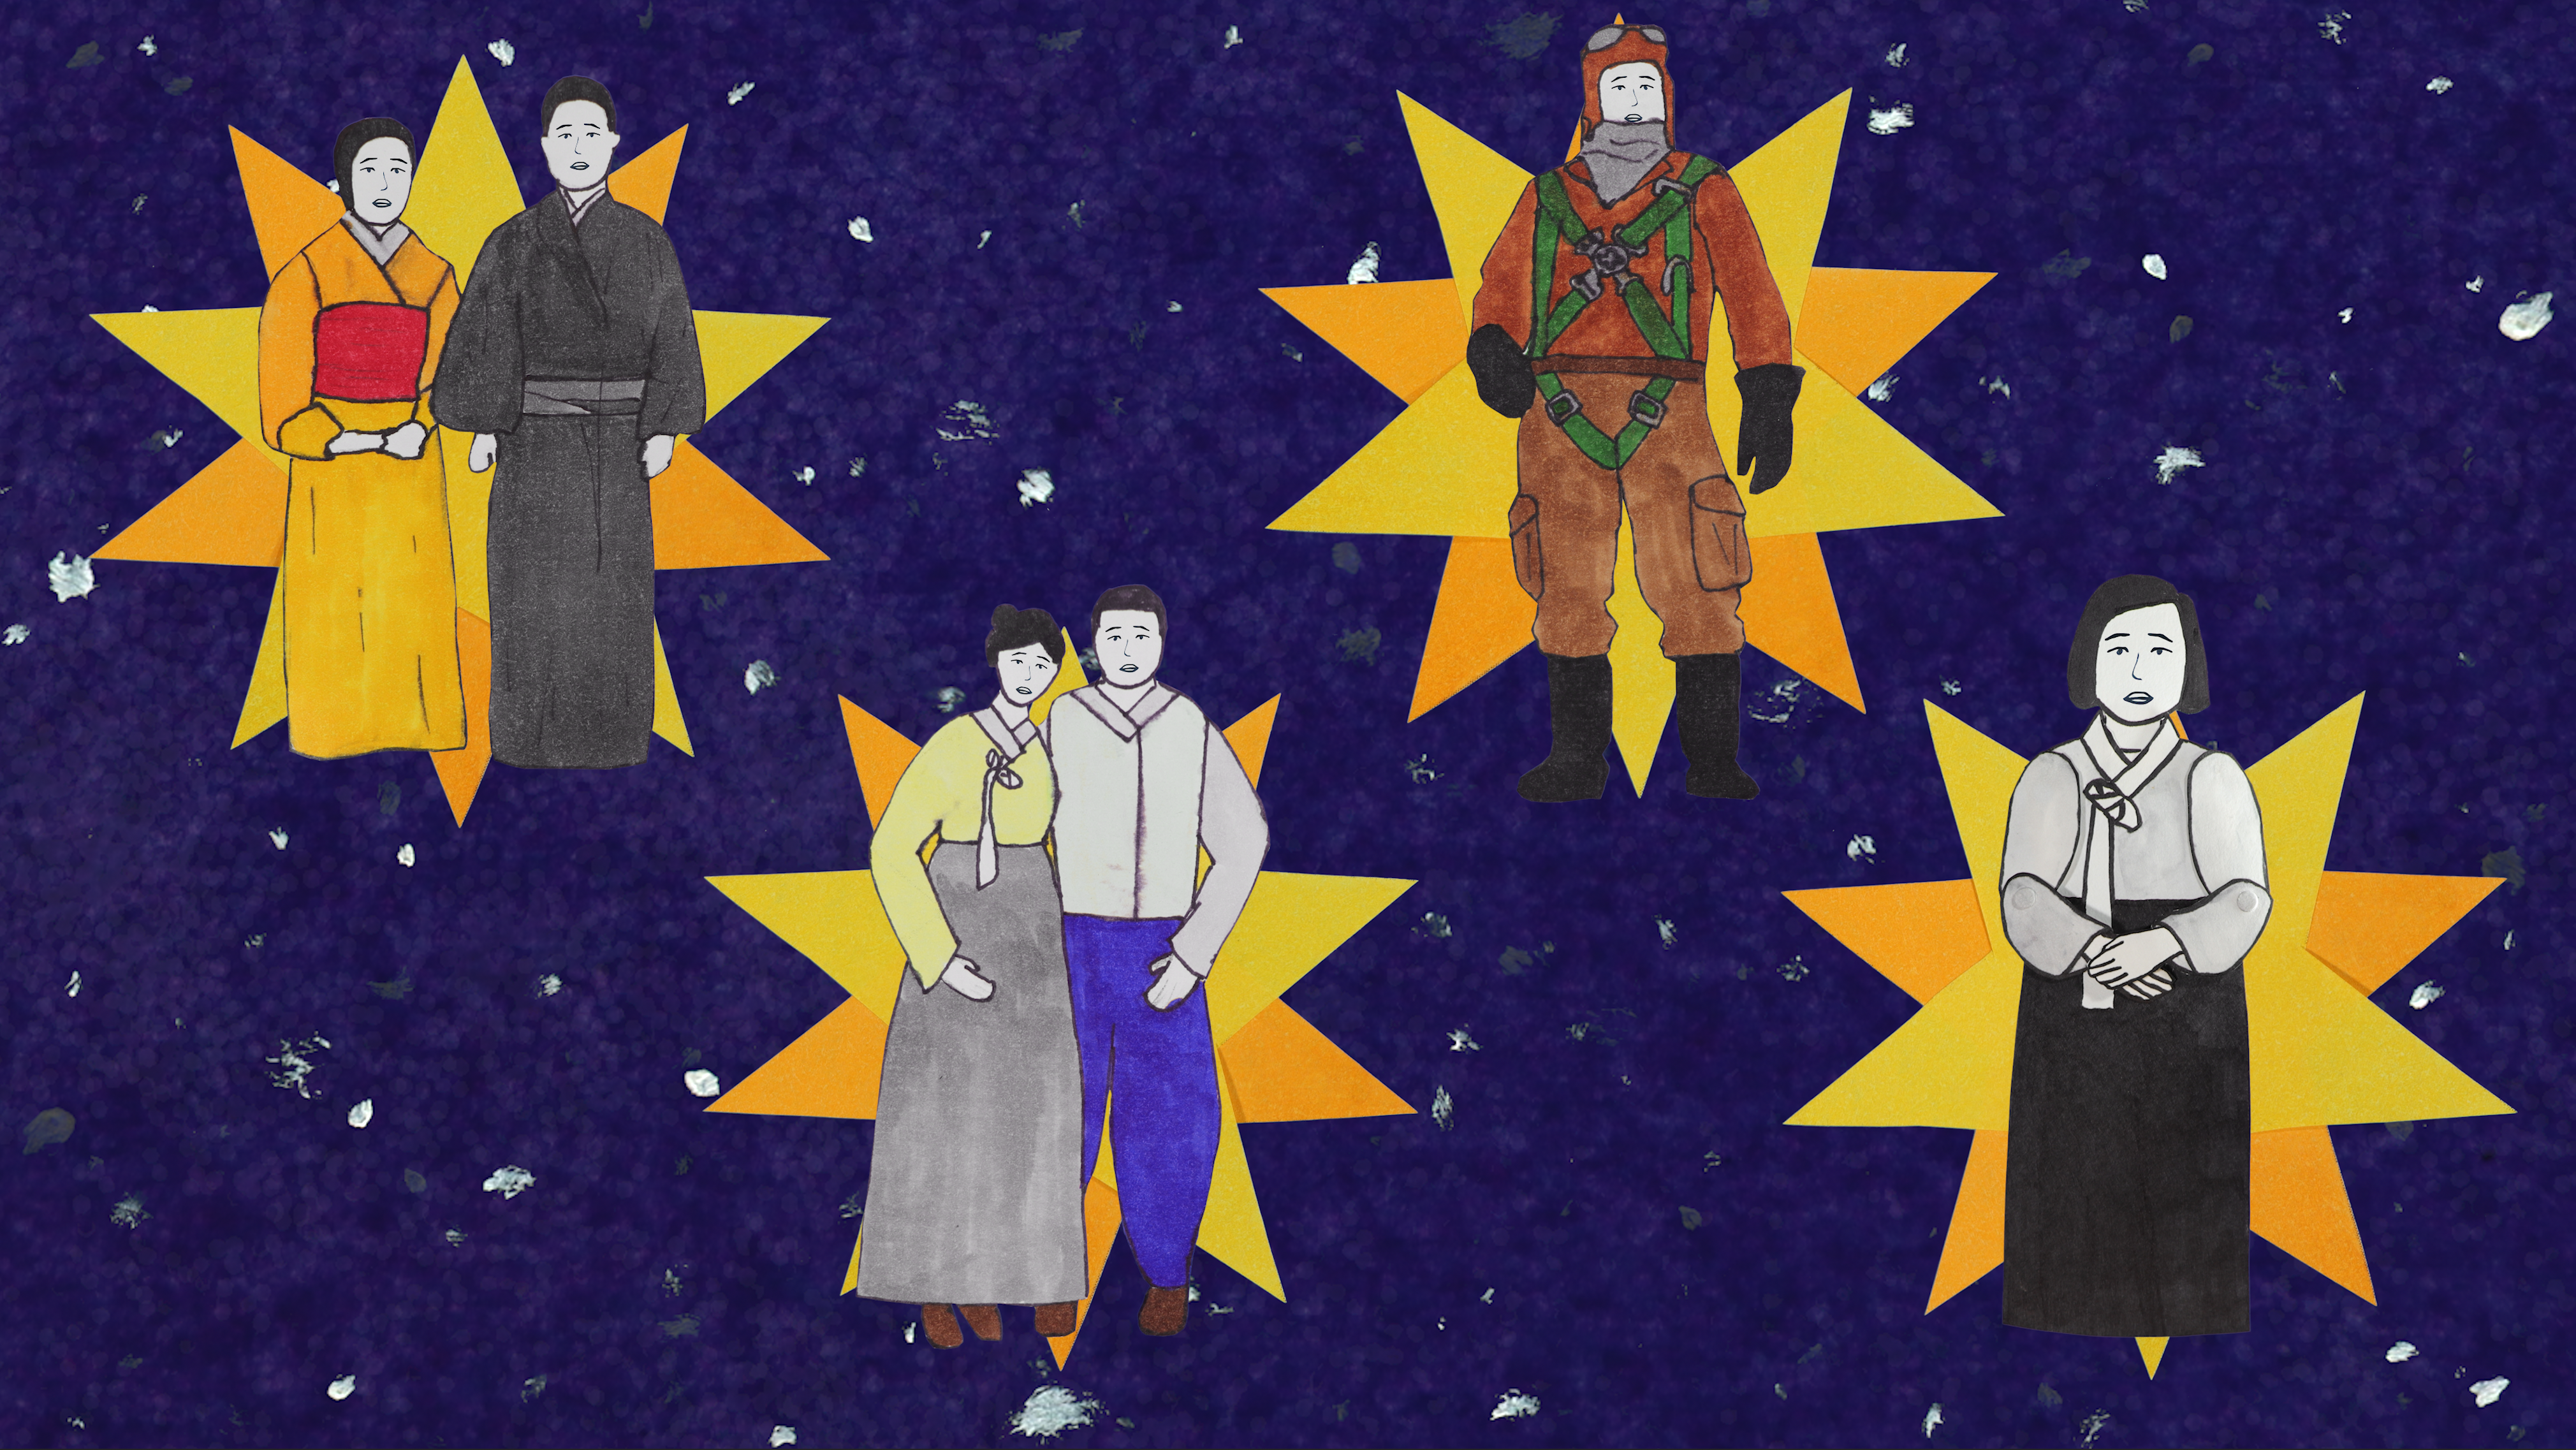 "My Sisters In The Stars: The Story of Lee Yong-soo" – An Animated Student Documentary on WWII-Era Comfort Women System of Sexual Slavery in the Pacific